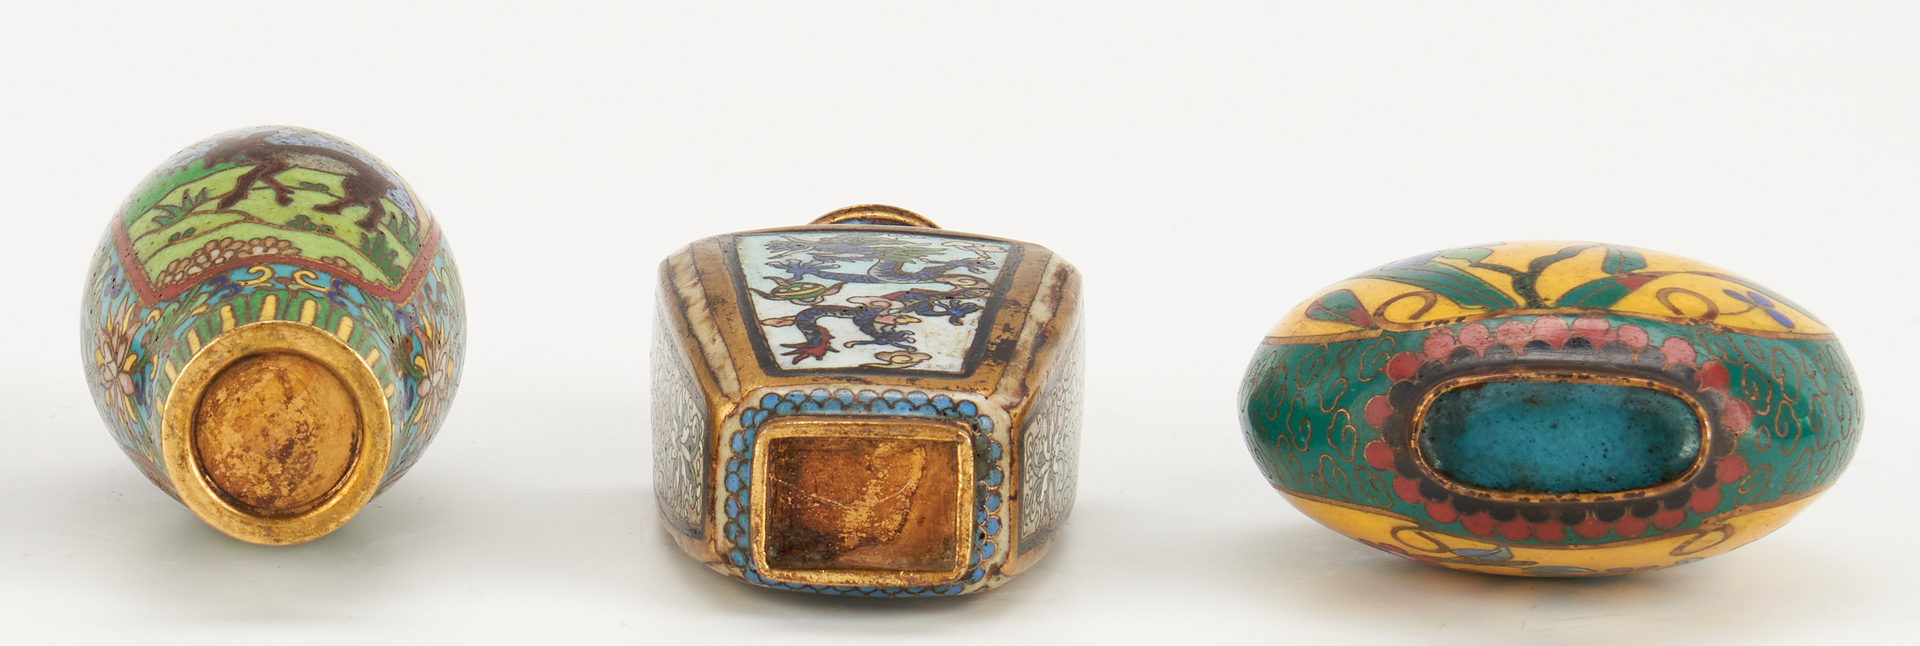 Lot 290: 10 Chinese Cloisonne Snuff Bottles, incl. Double Snuff Bottle